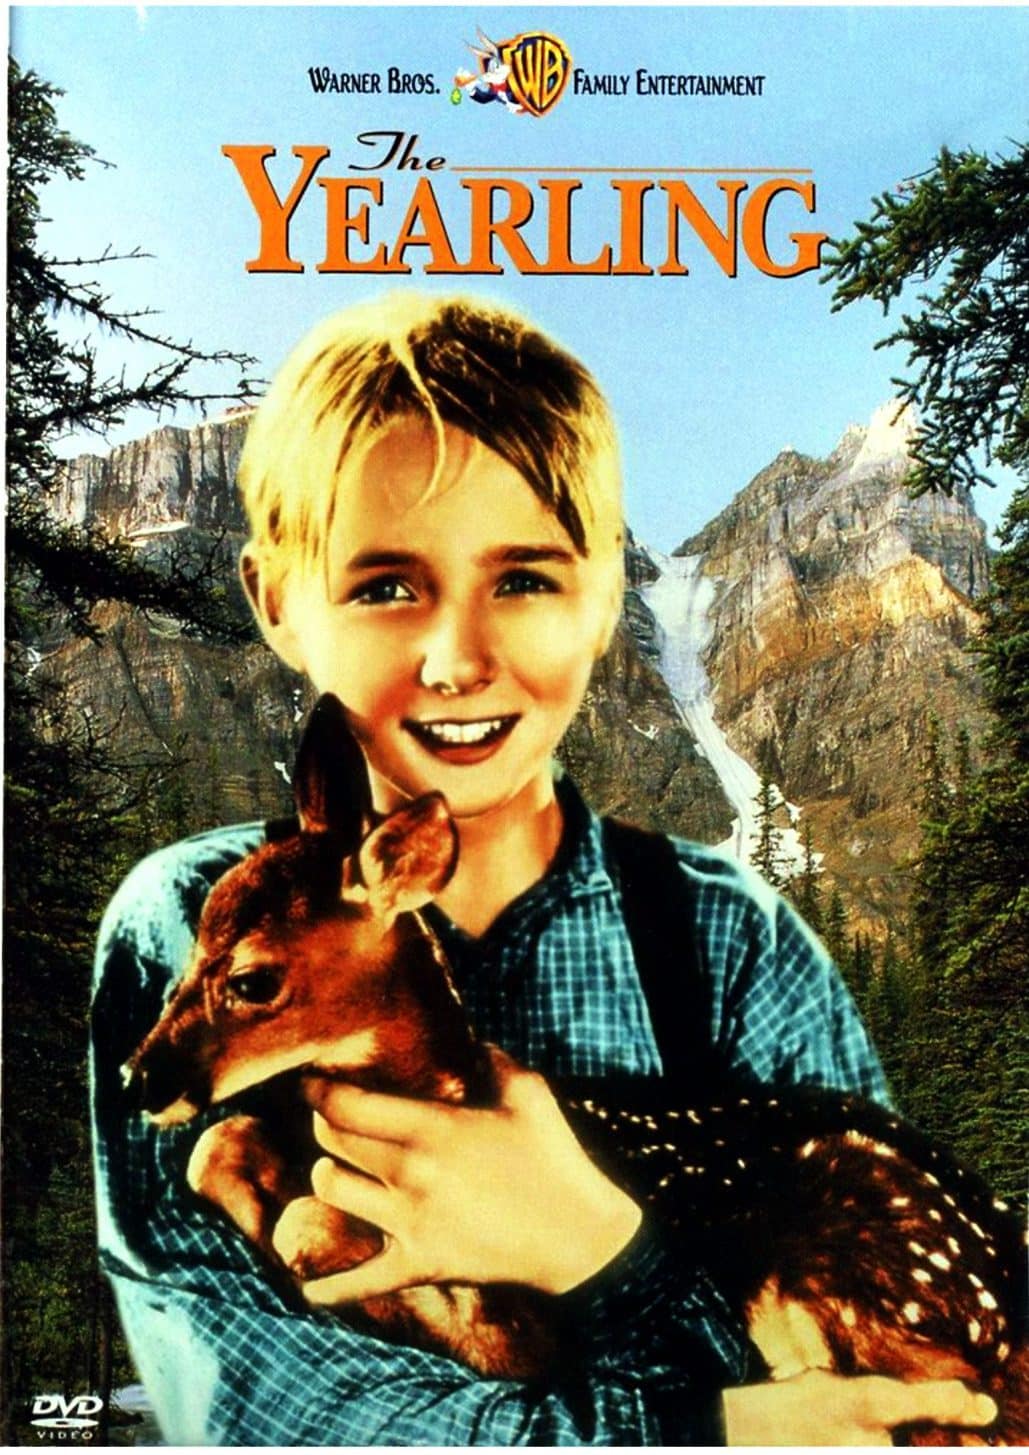 The Yearling - Gregory Peck DVD - Film Classics